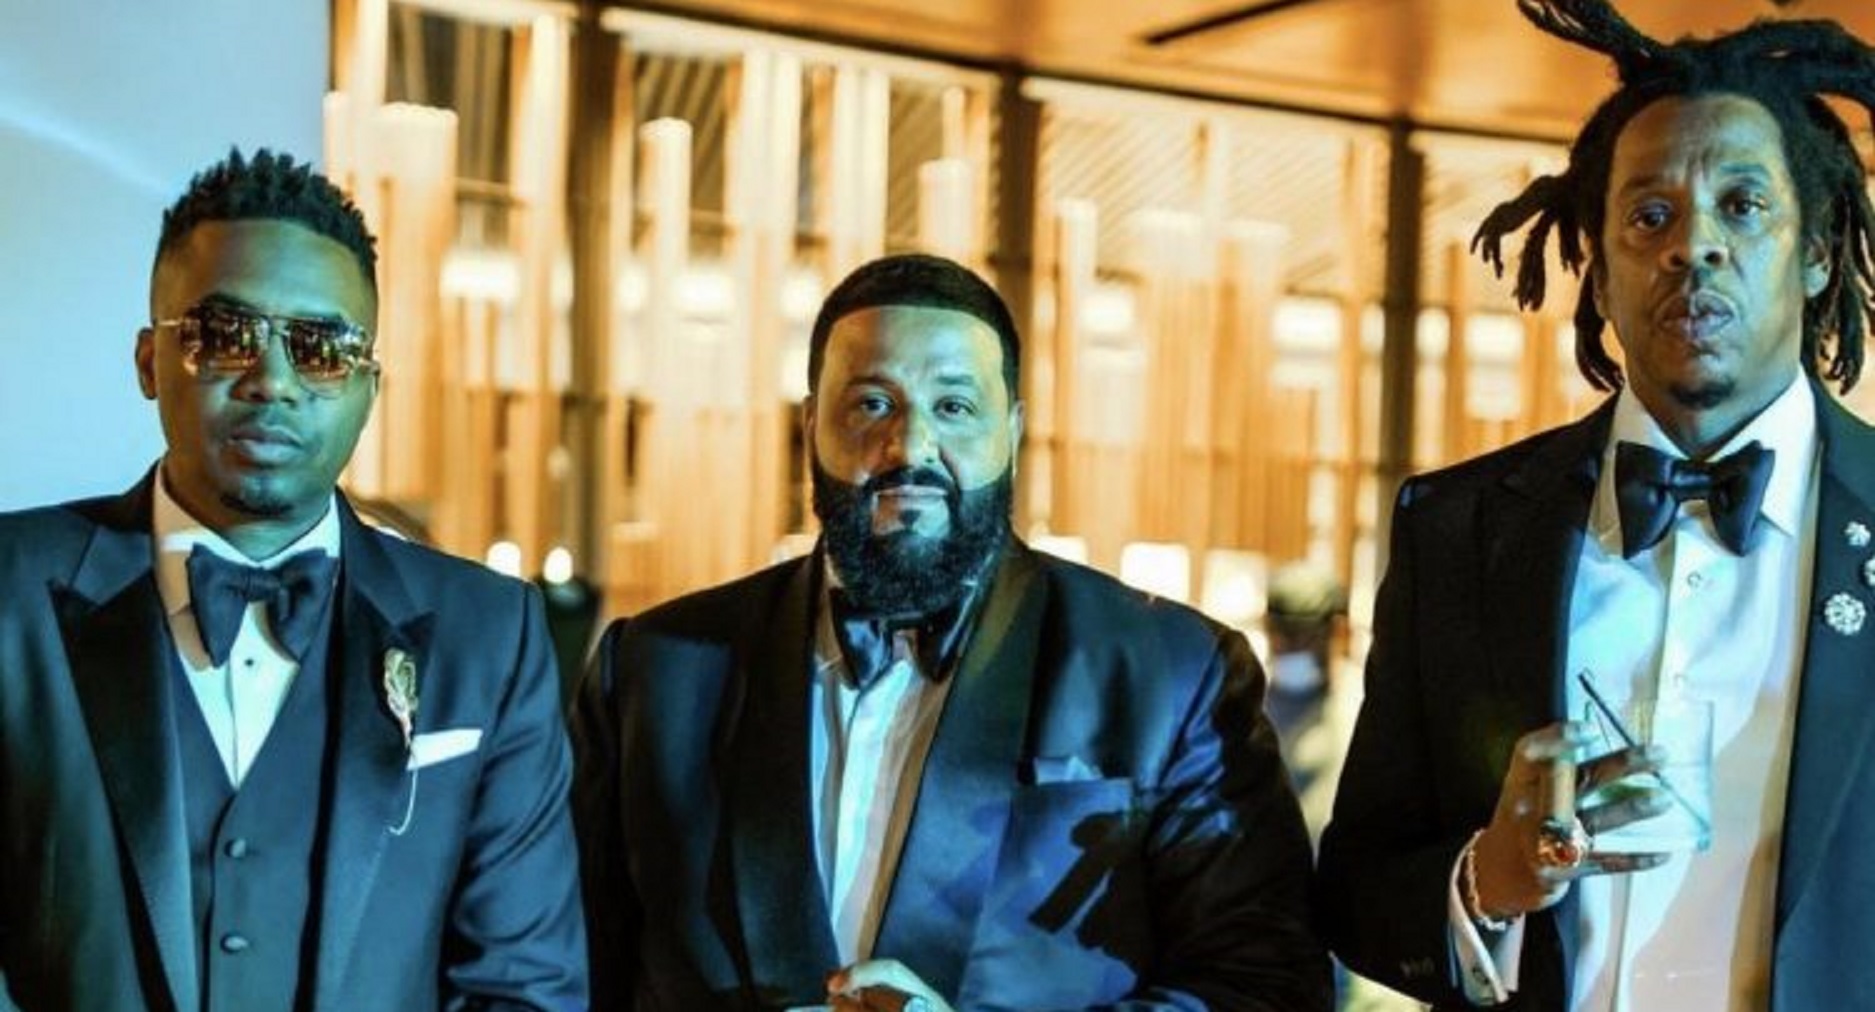 Watch: DJ Khaled Premieres Video For New Song ‘Sorry Not Sorry’ Feat Jay Z, Nas & Beyonce